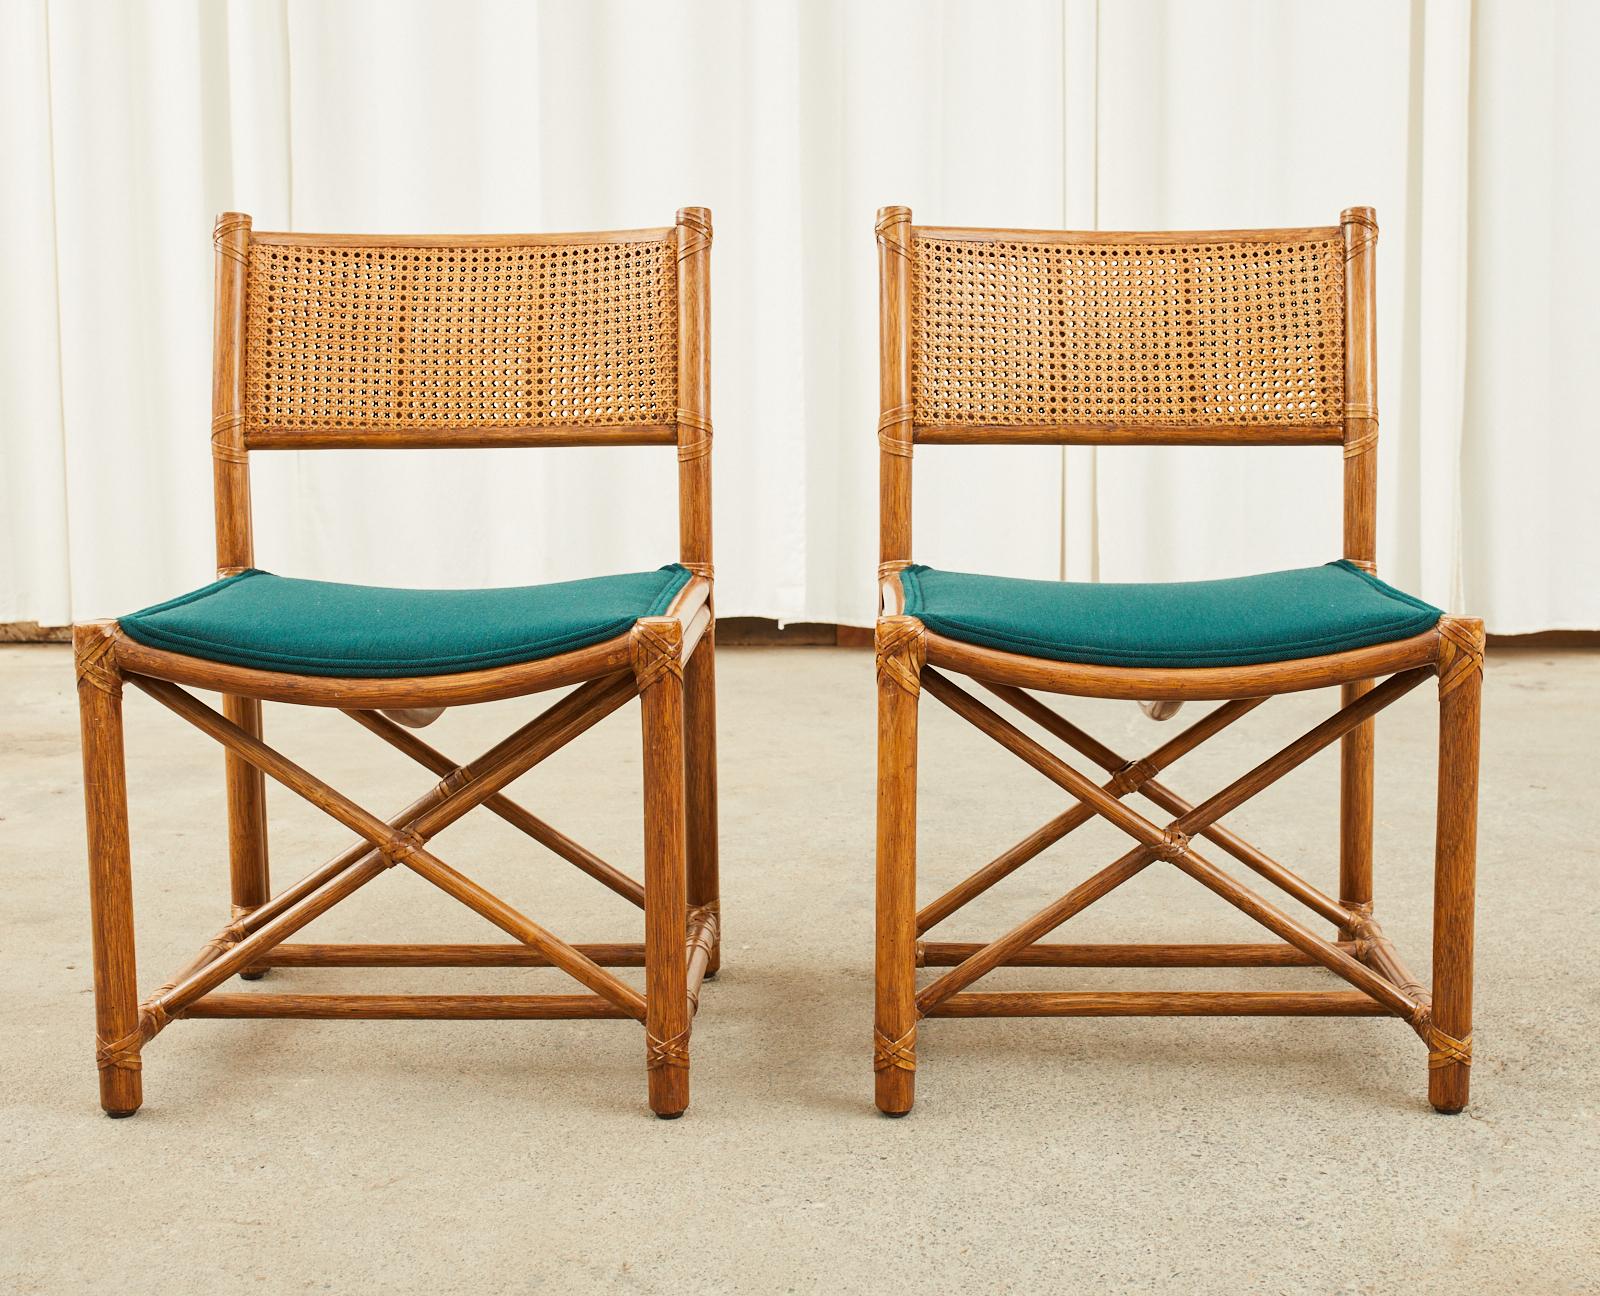 Genuine and rare pair of rattan framed dining chairs made in the California organic modern style by McGuire. The chairs feature a double caned back and leather rawhide laces on the exposed joints. Upholstered with a rich emerald green fabric on the